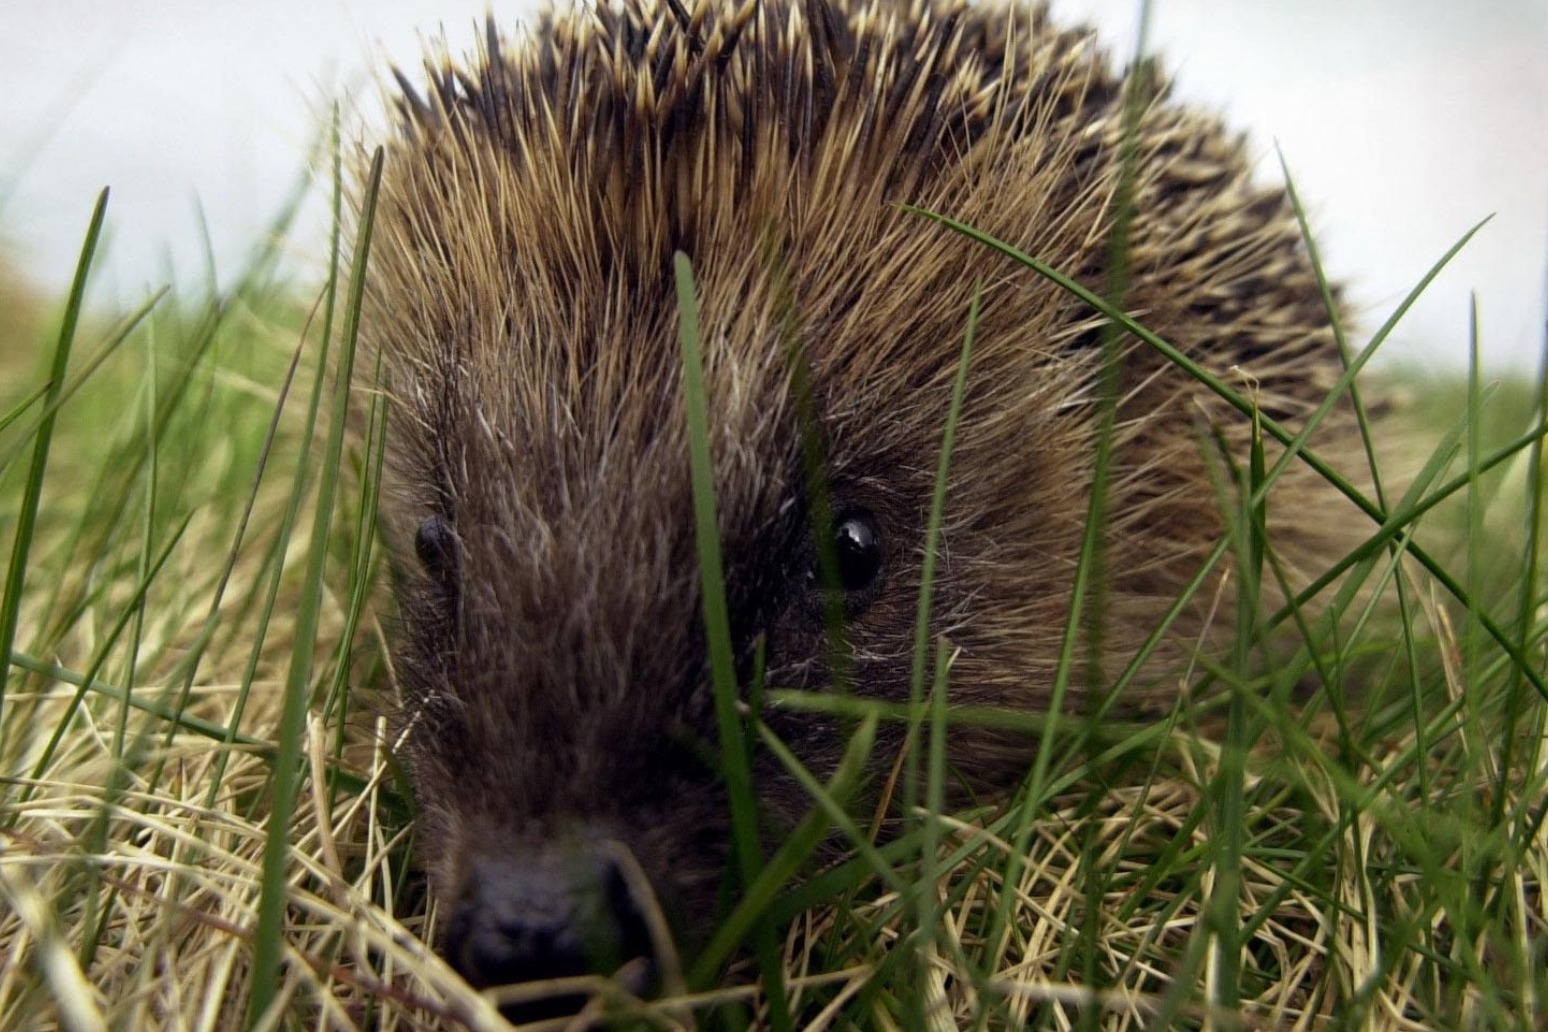 Research taking place into hedgehog population 